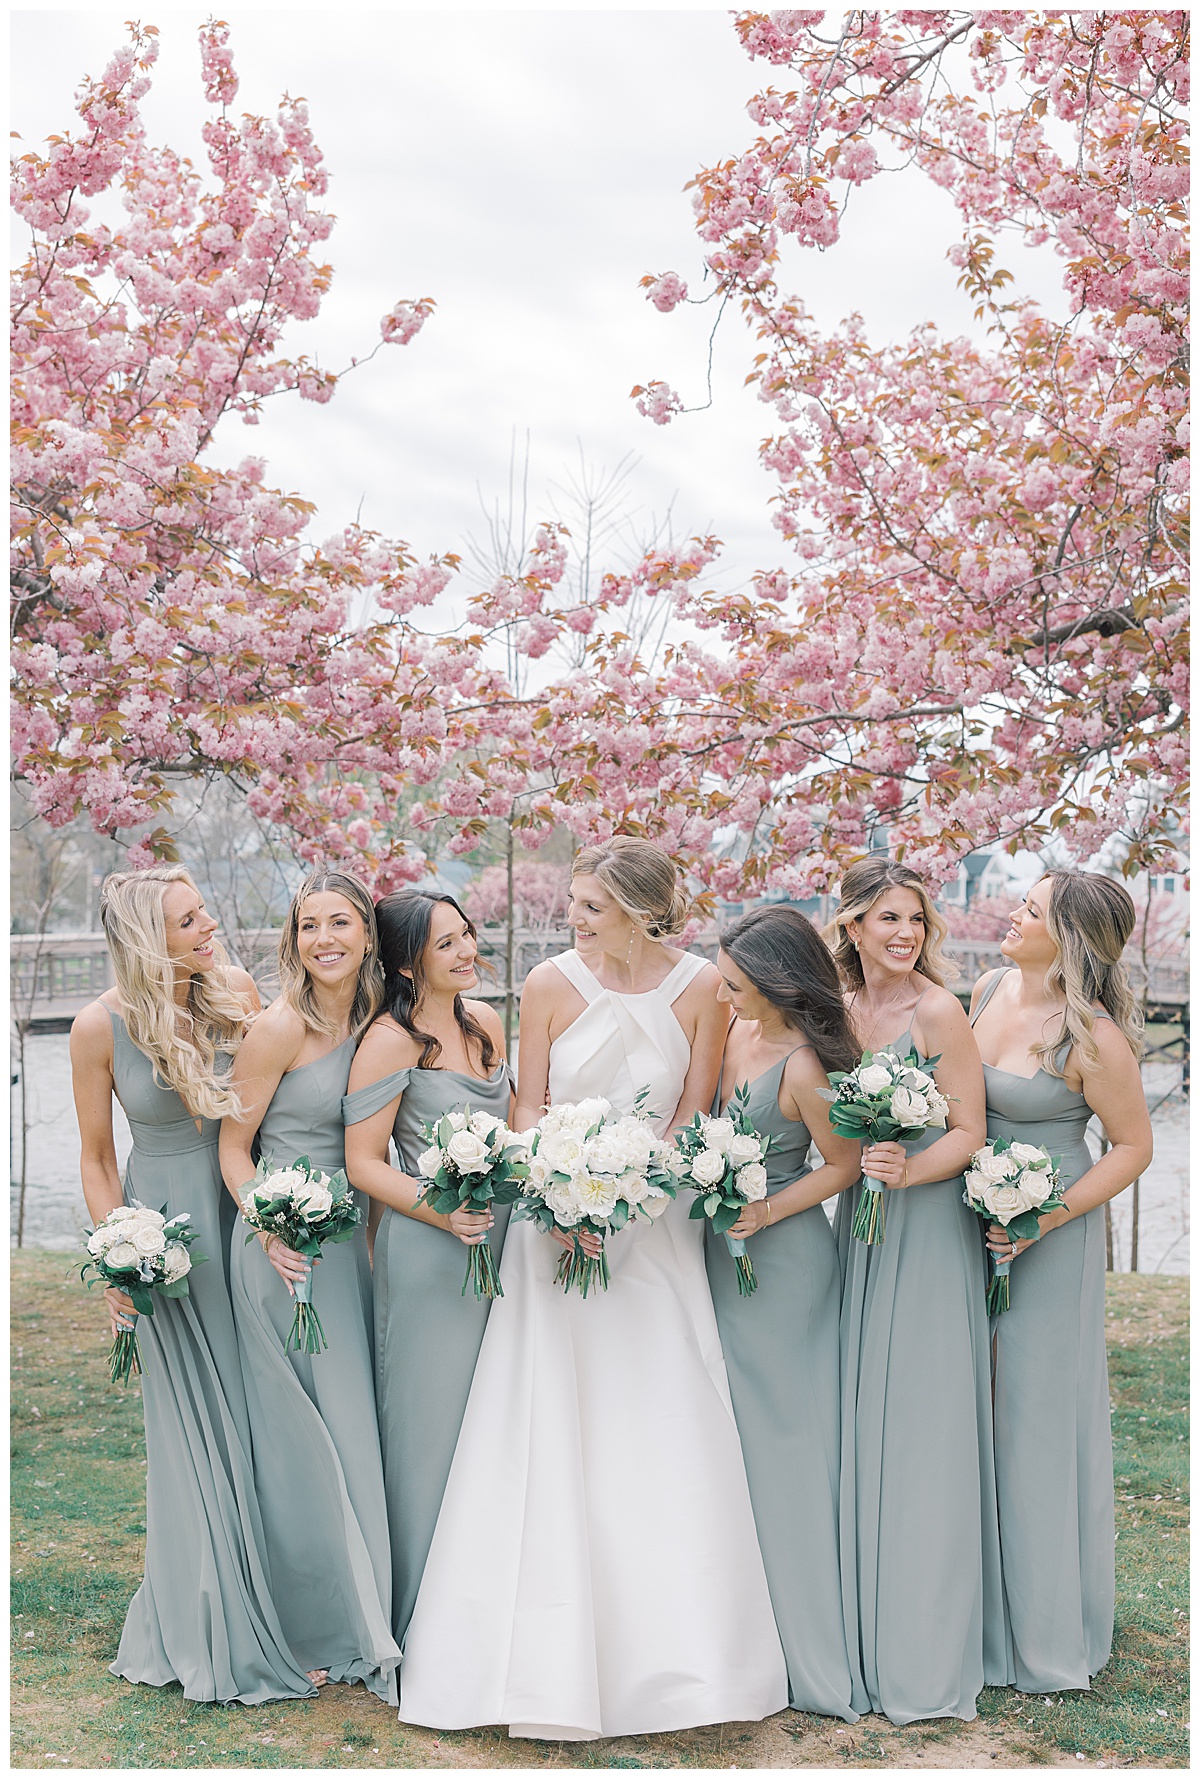 Bride with her bridesmaids under the cherry blossoms in sage dresses. 